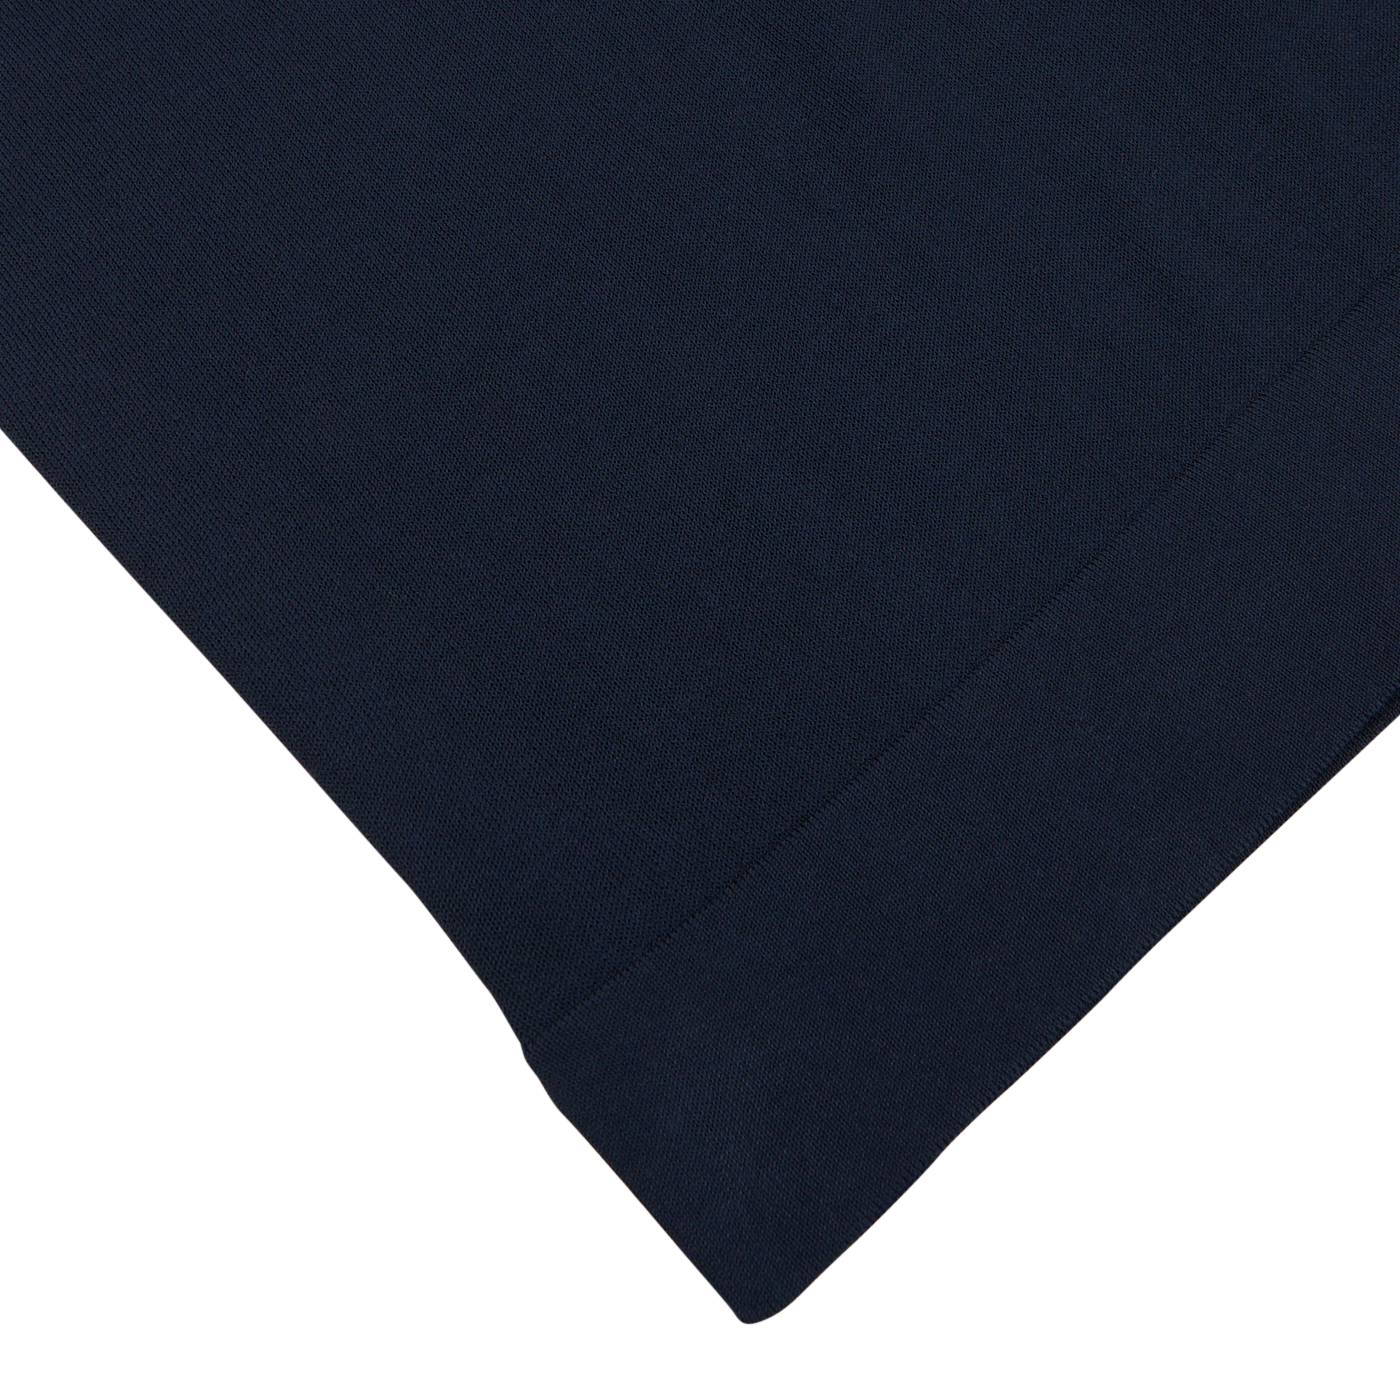 A close-up image of a Filippo de Laurentiis navy blue crepe cotton polo shirt with a folded corner, set against a white background.